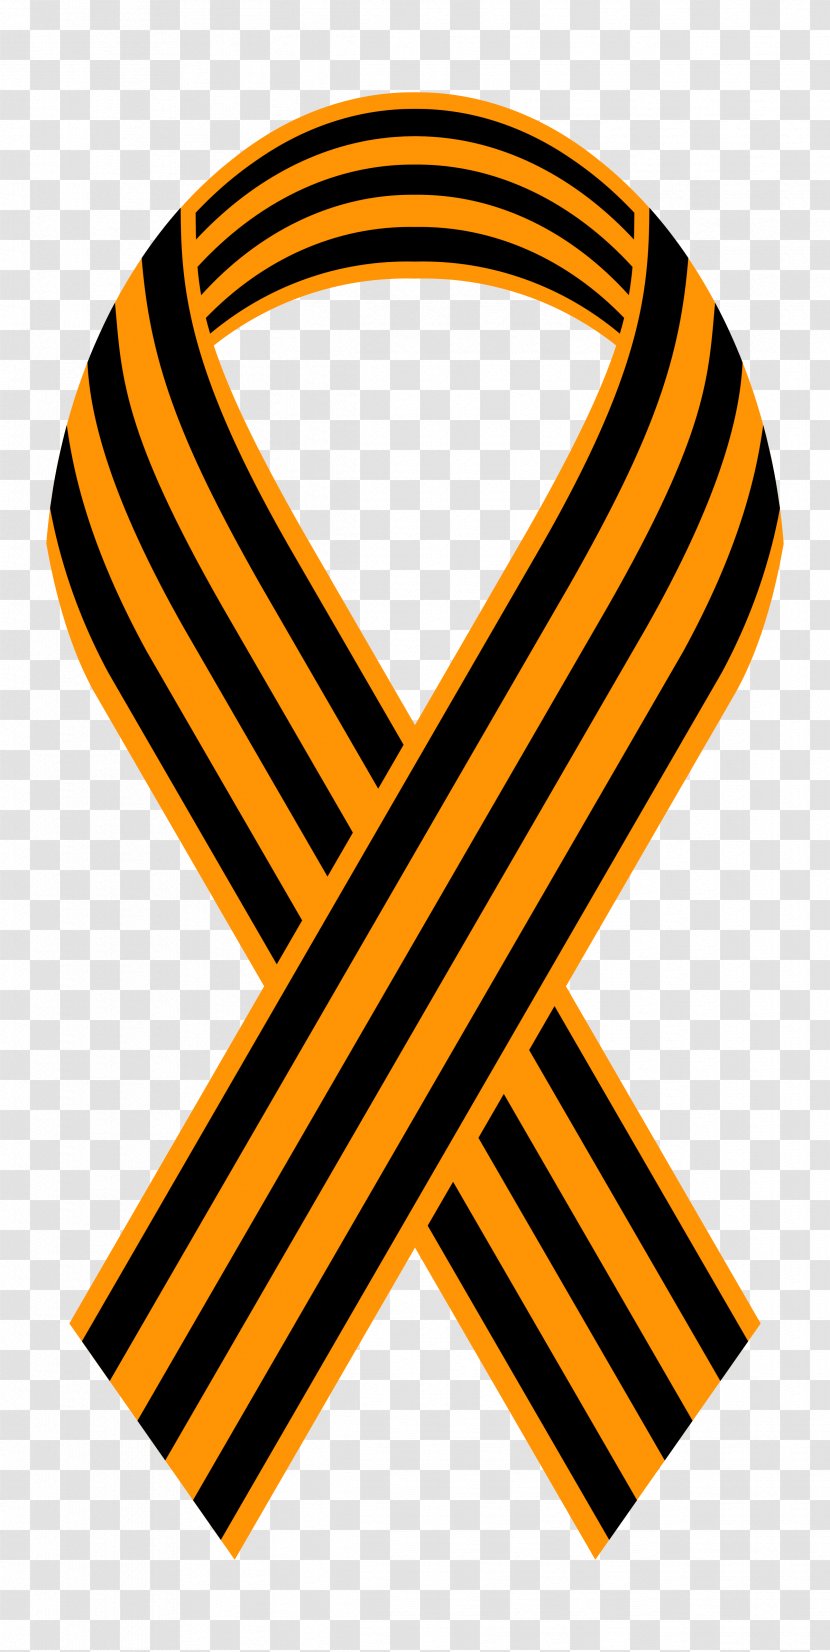 Ribbon Of Saint George 2014 Pro-Russian Unrest In Ukraine Yellow - Victory Transparent PNG